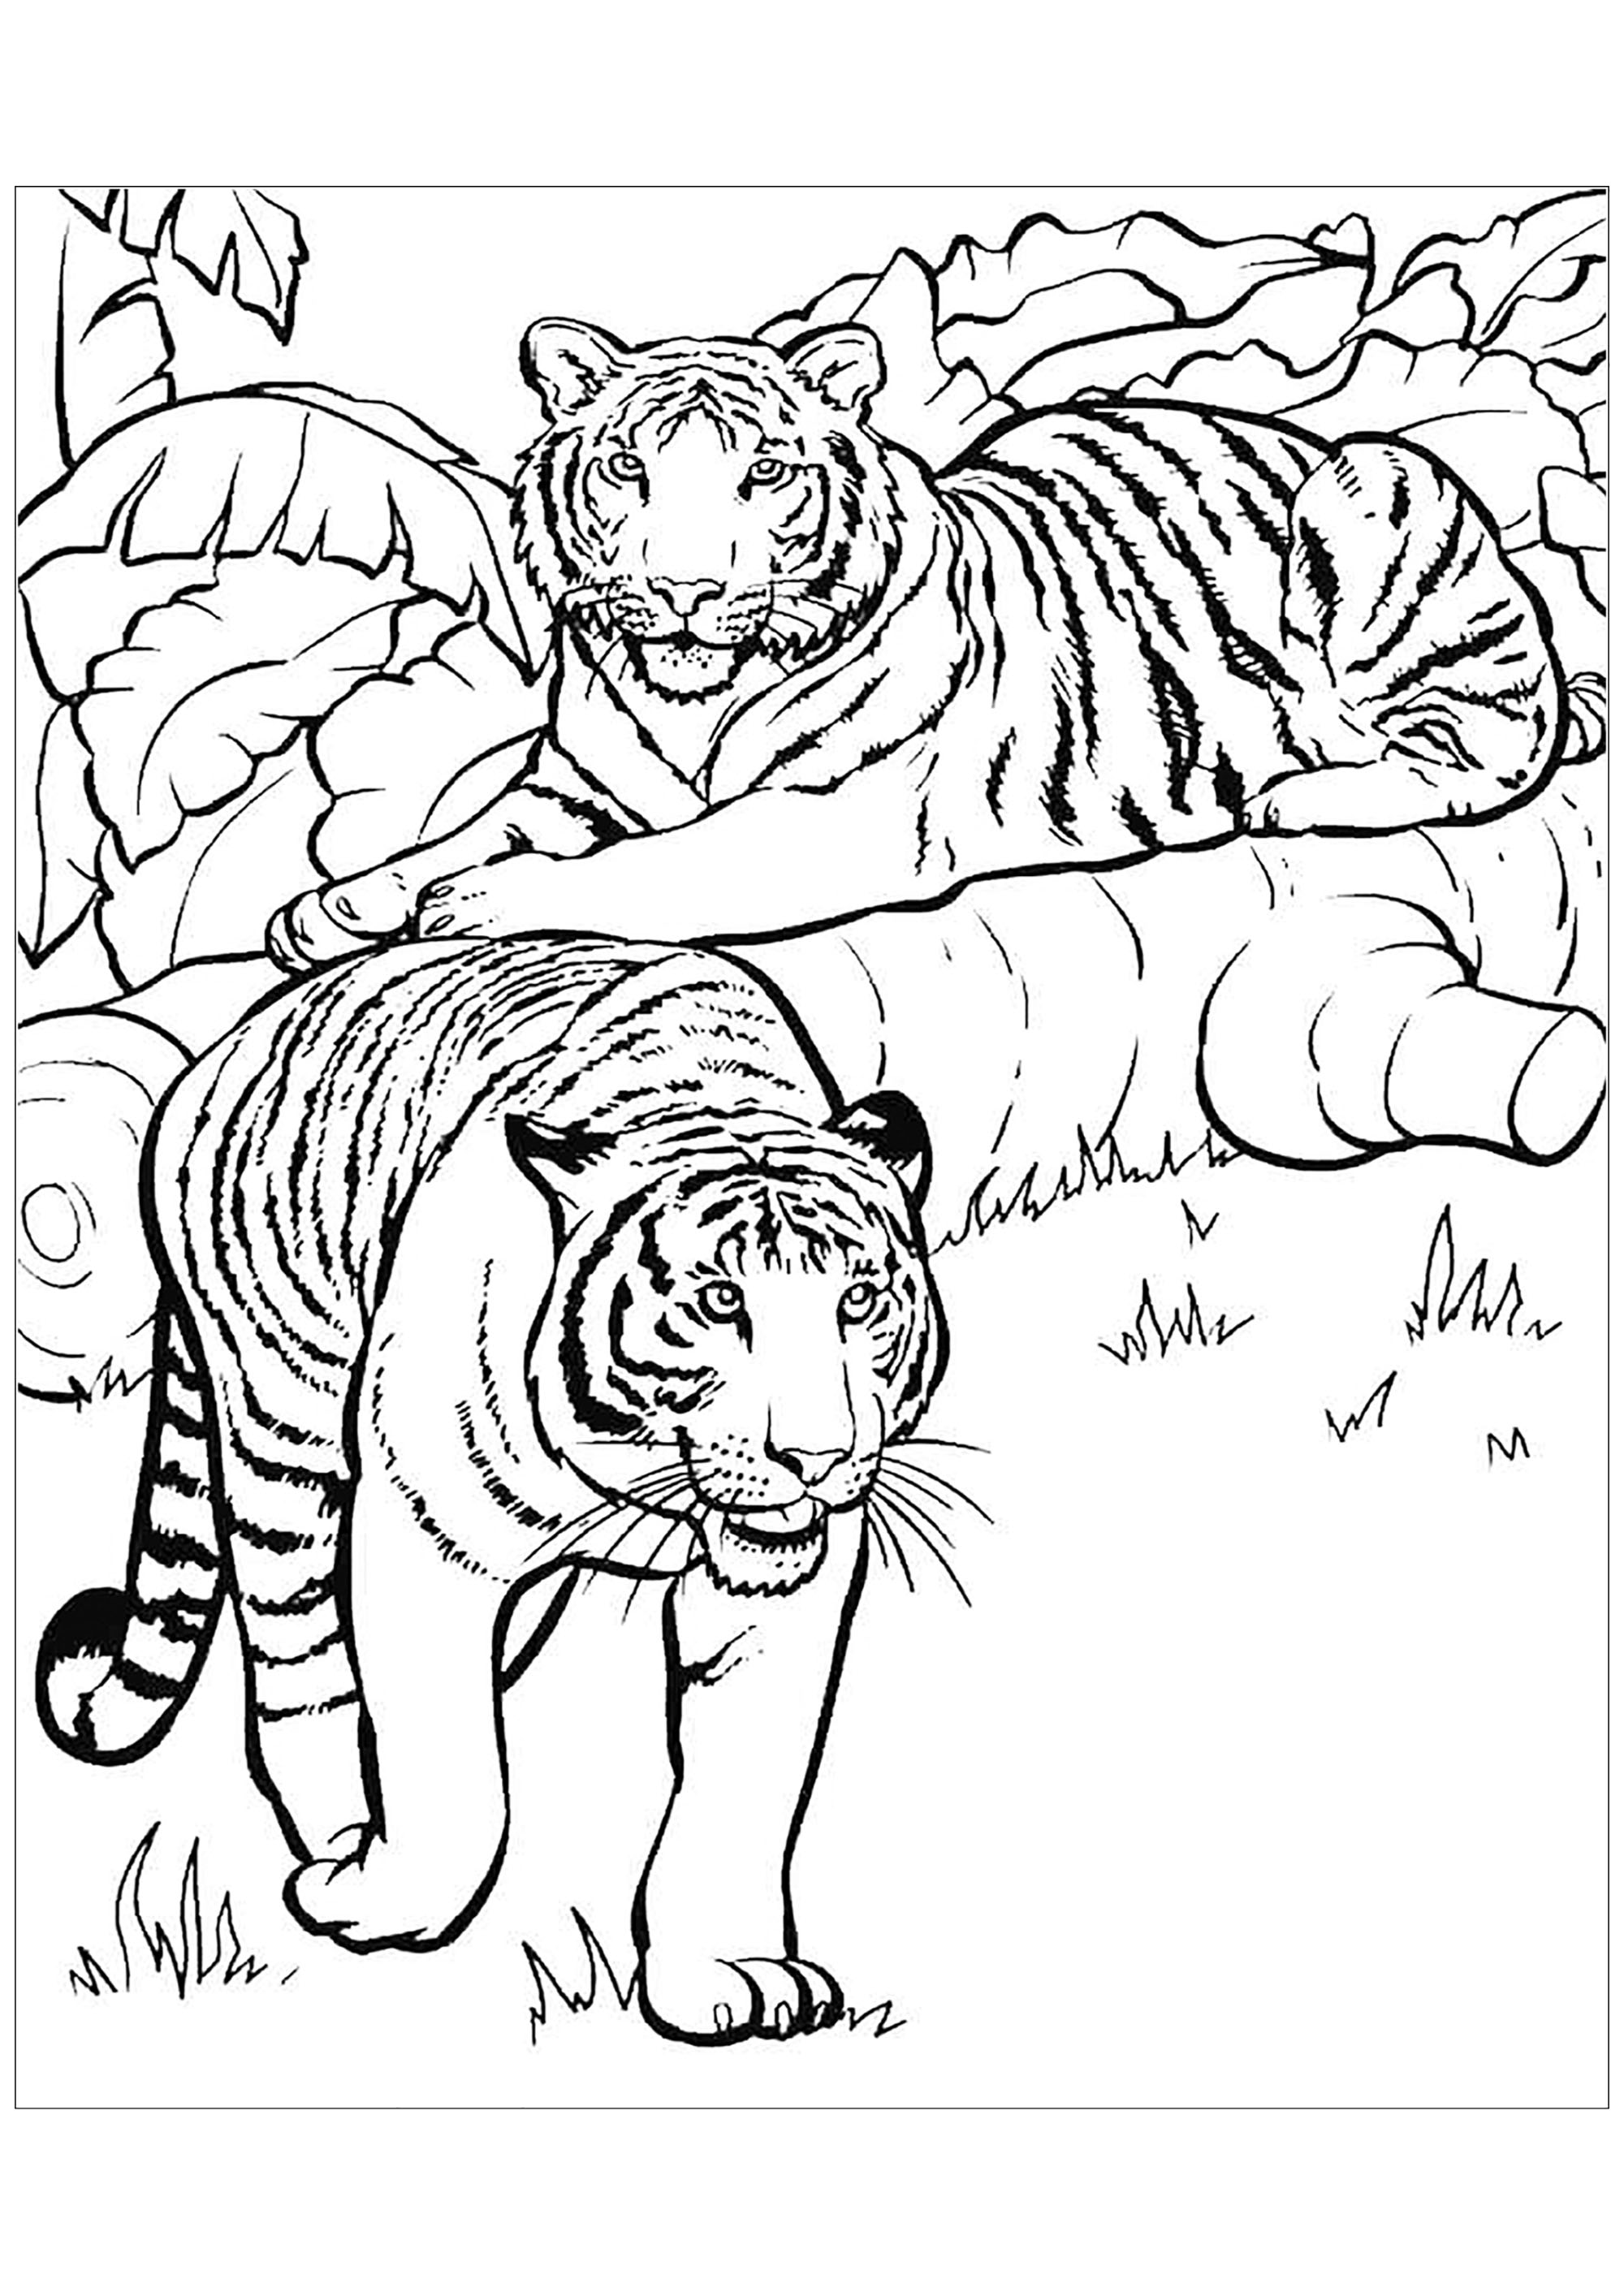 Tigers to color for children   Tigers Kids Coloring Pages